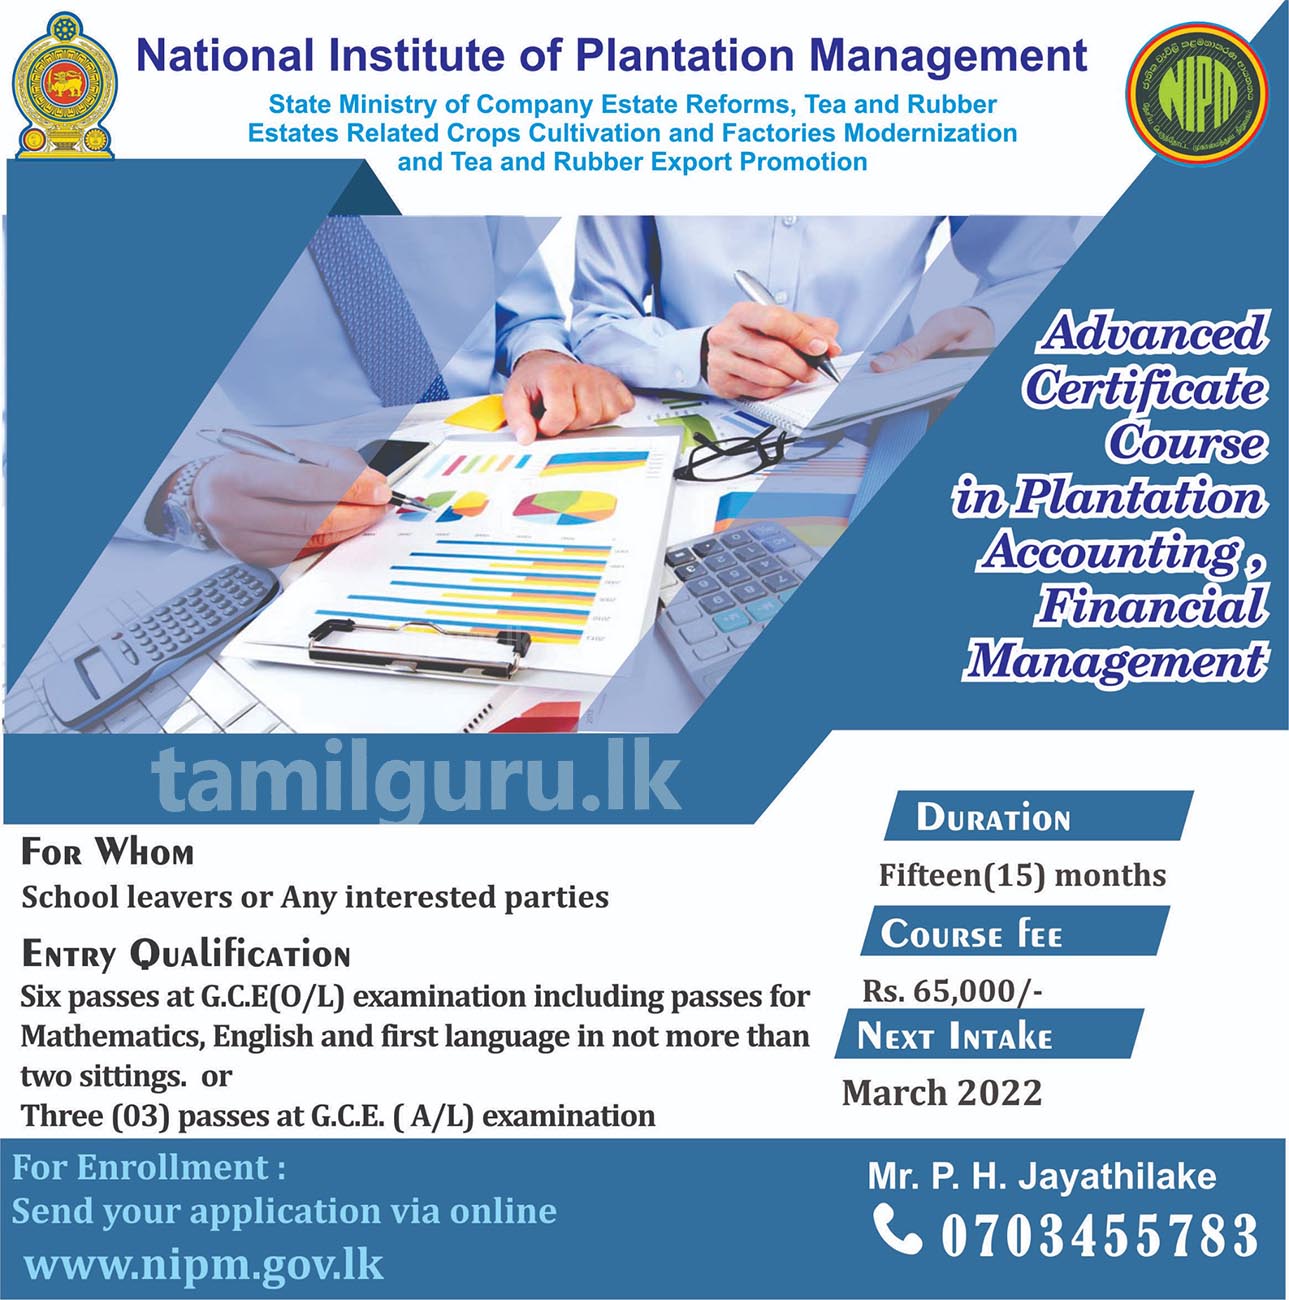 Advanced Certificate Course in Plantation Accounting, Financial Management 2022 - National Institute of Plantation Management (NIPM)